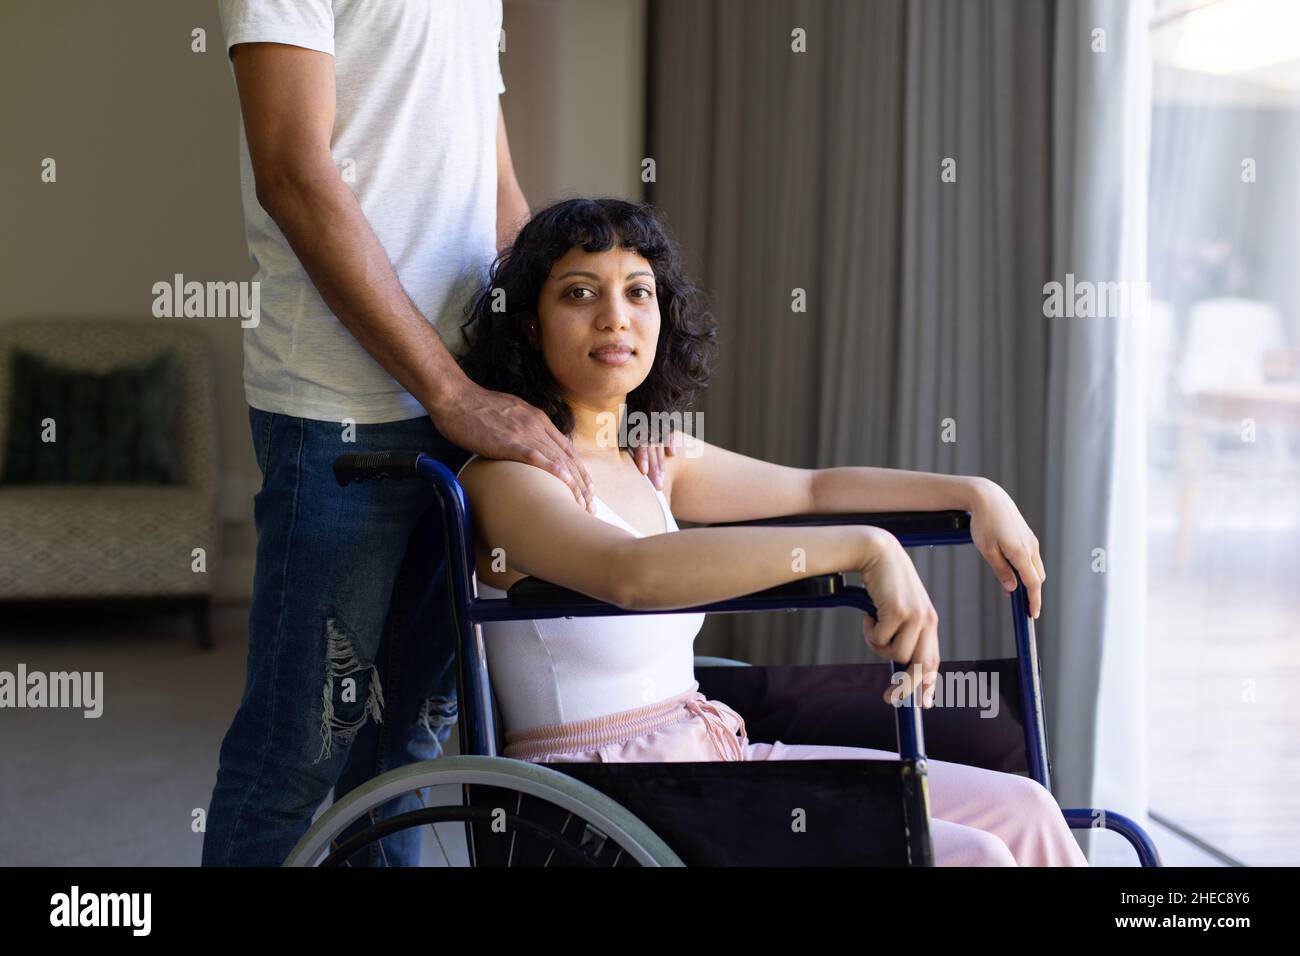 African american disabled woman sitting on a wheelchair with husbands hand on her shoulders Stock Photo